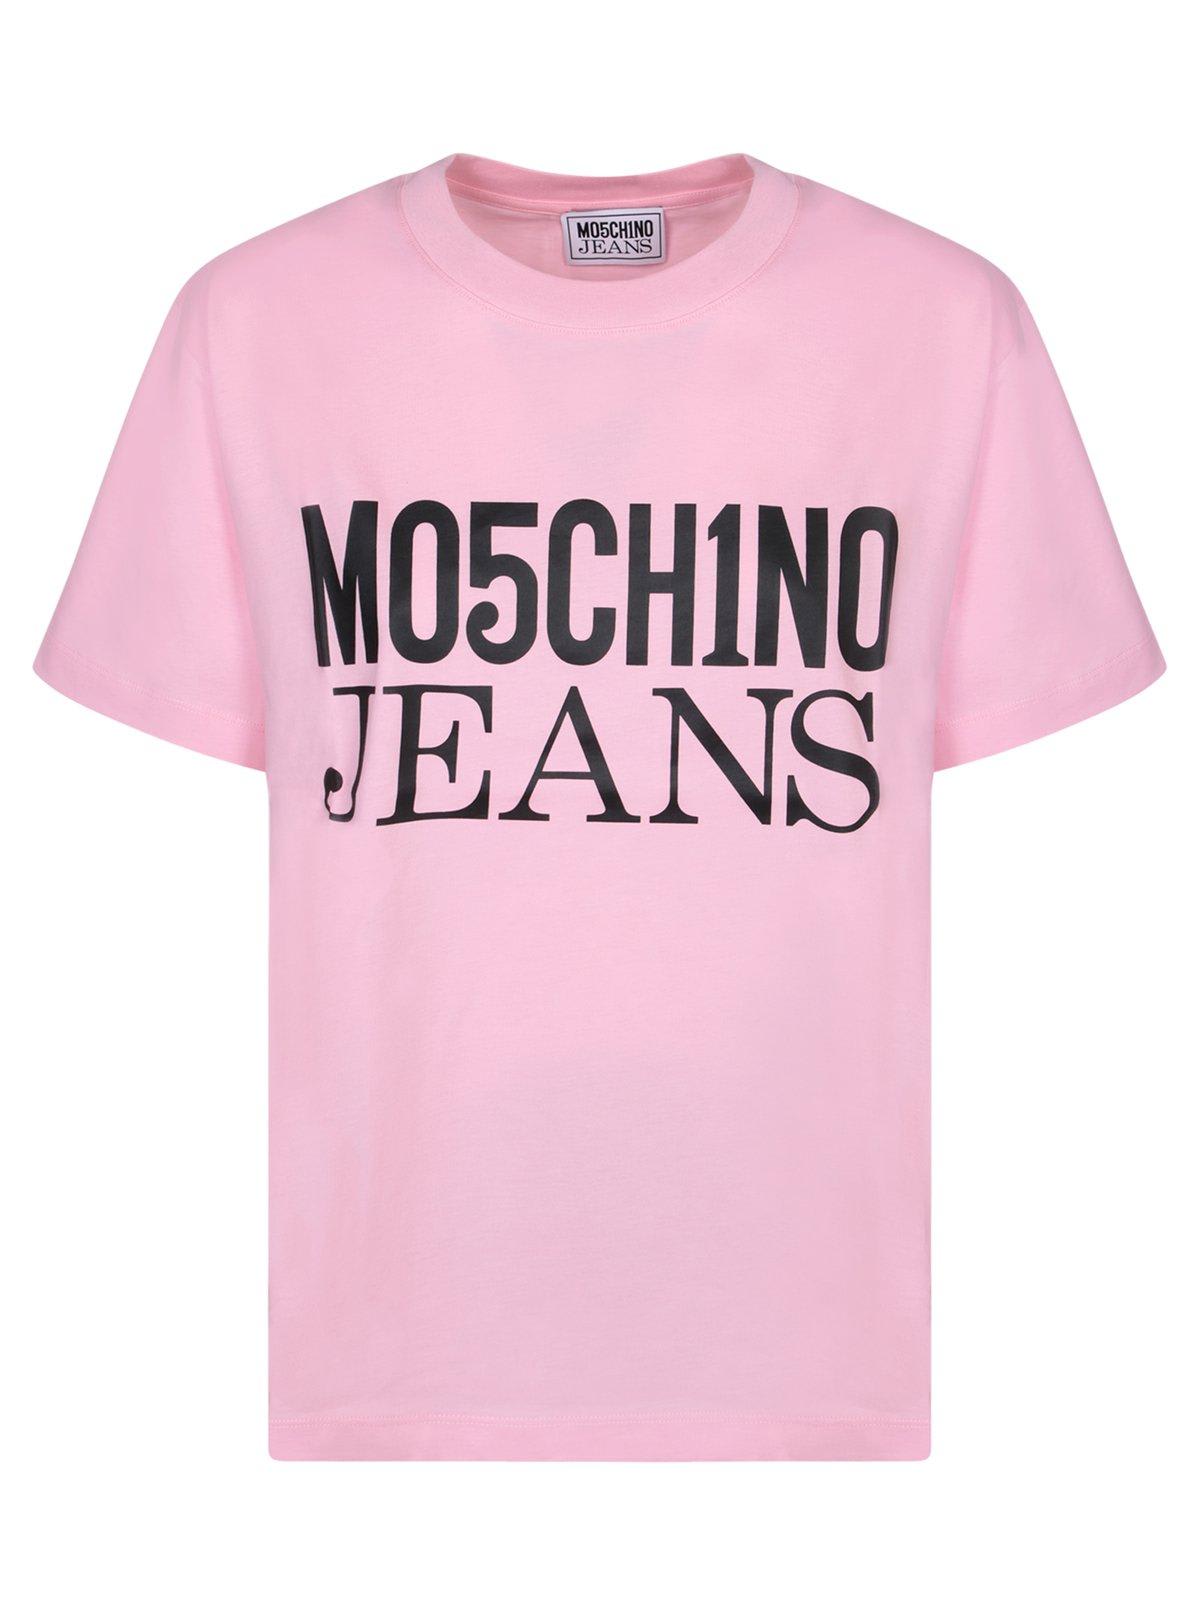 M05ch1n0 Jeans Jeans Logo-printed Crewneck T-shirt In Pink